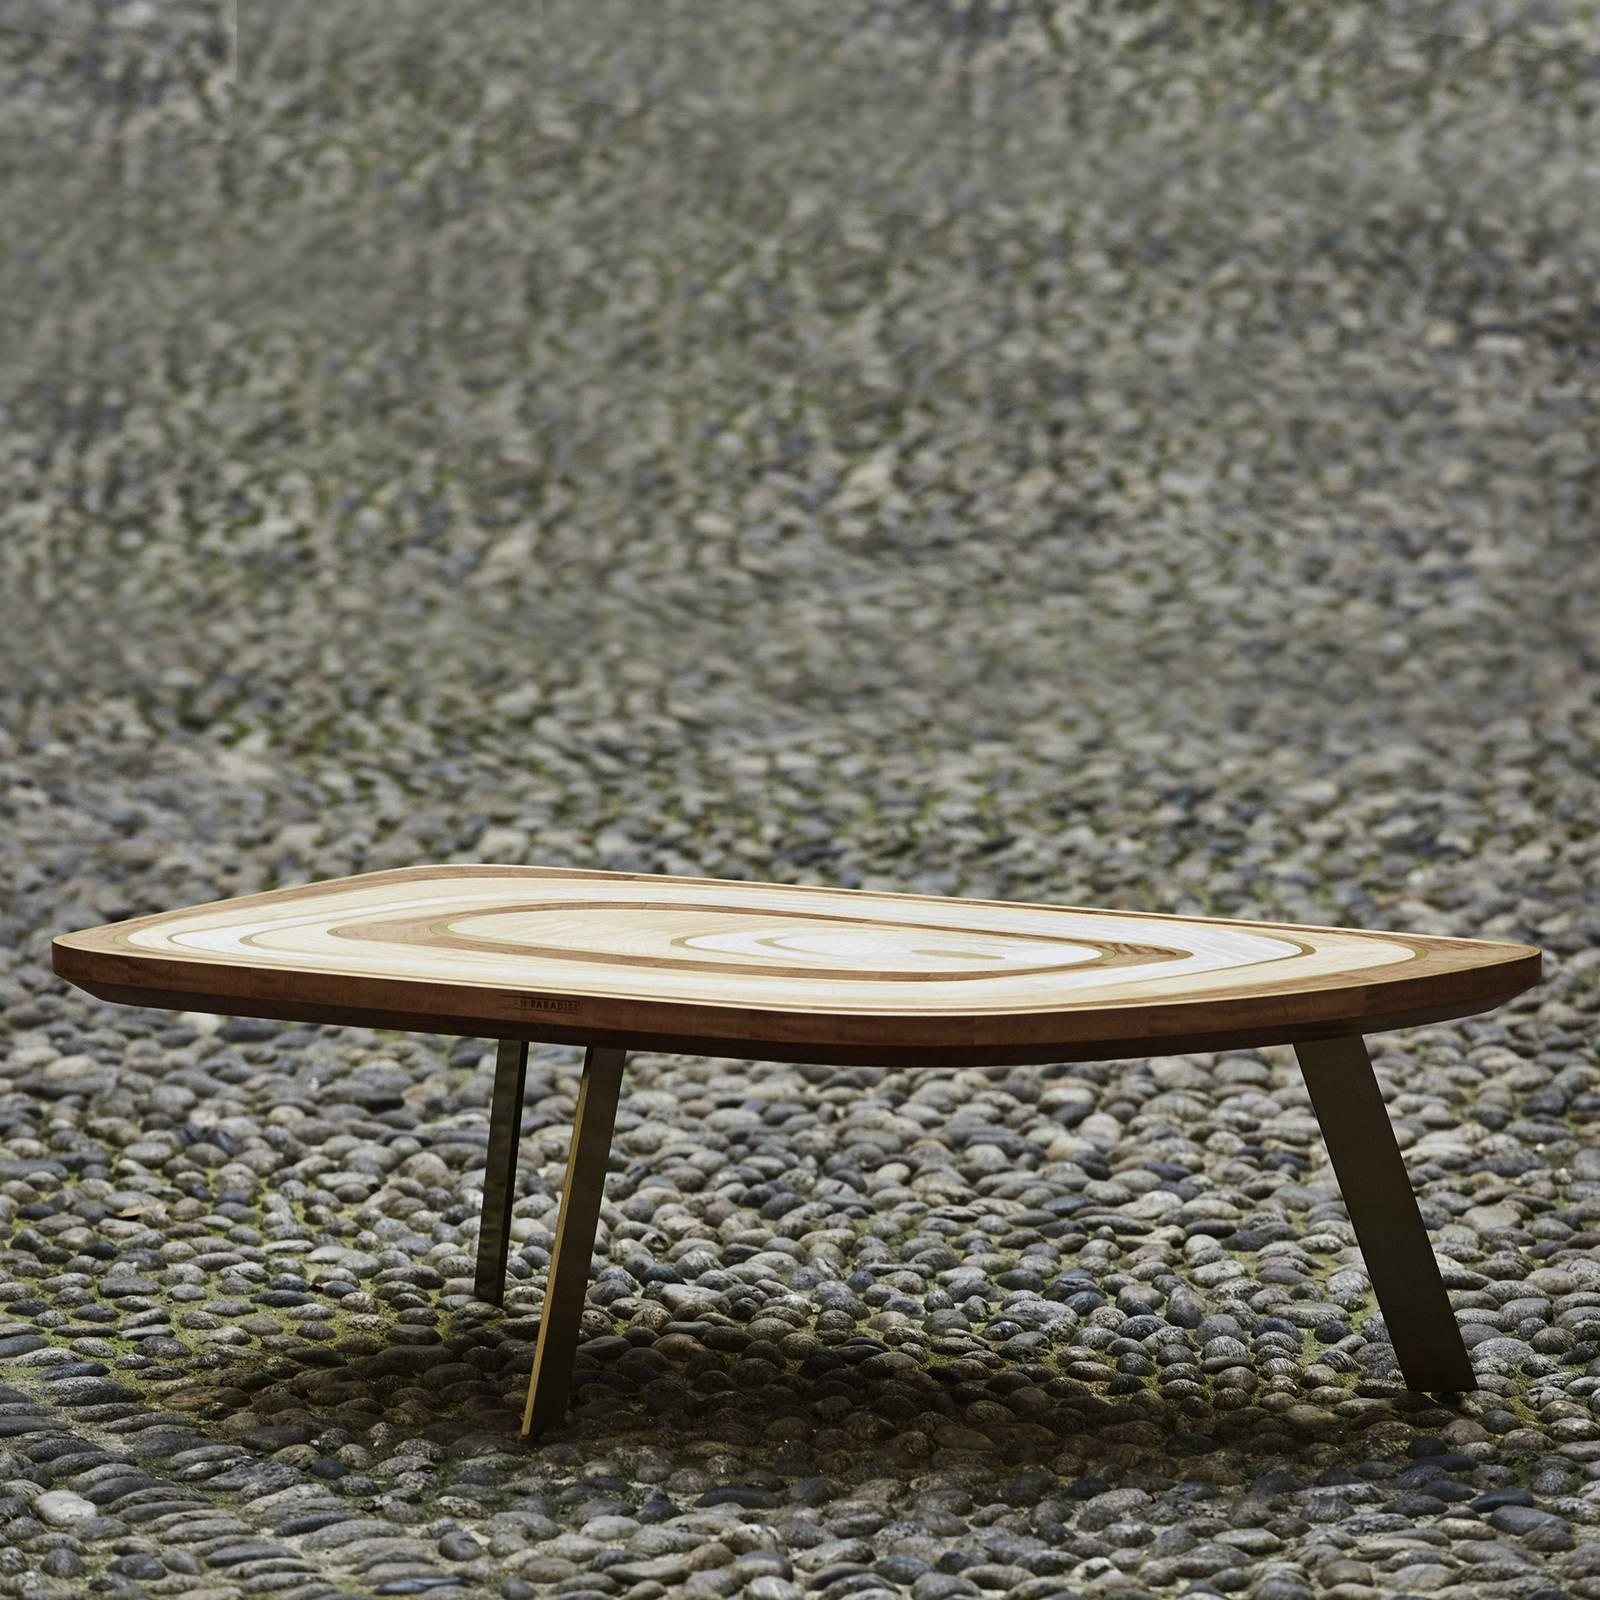 This exquisite coffee table was introduced at Milan Design Week 2018. Its unique silhouette comprises three slightly slanted legs supporting a rectangular top with rounded corners. The standout feature of this piece is the texture of the top that